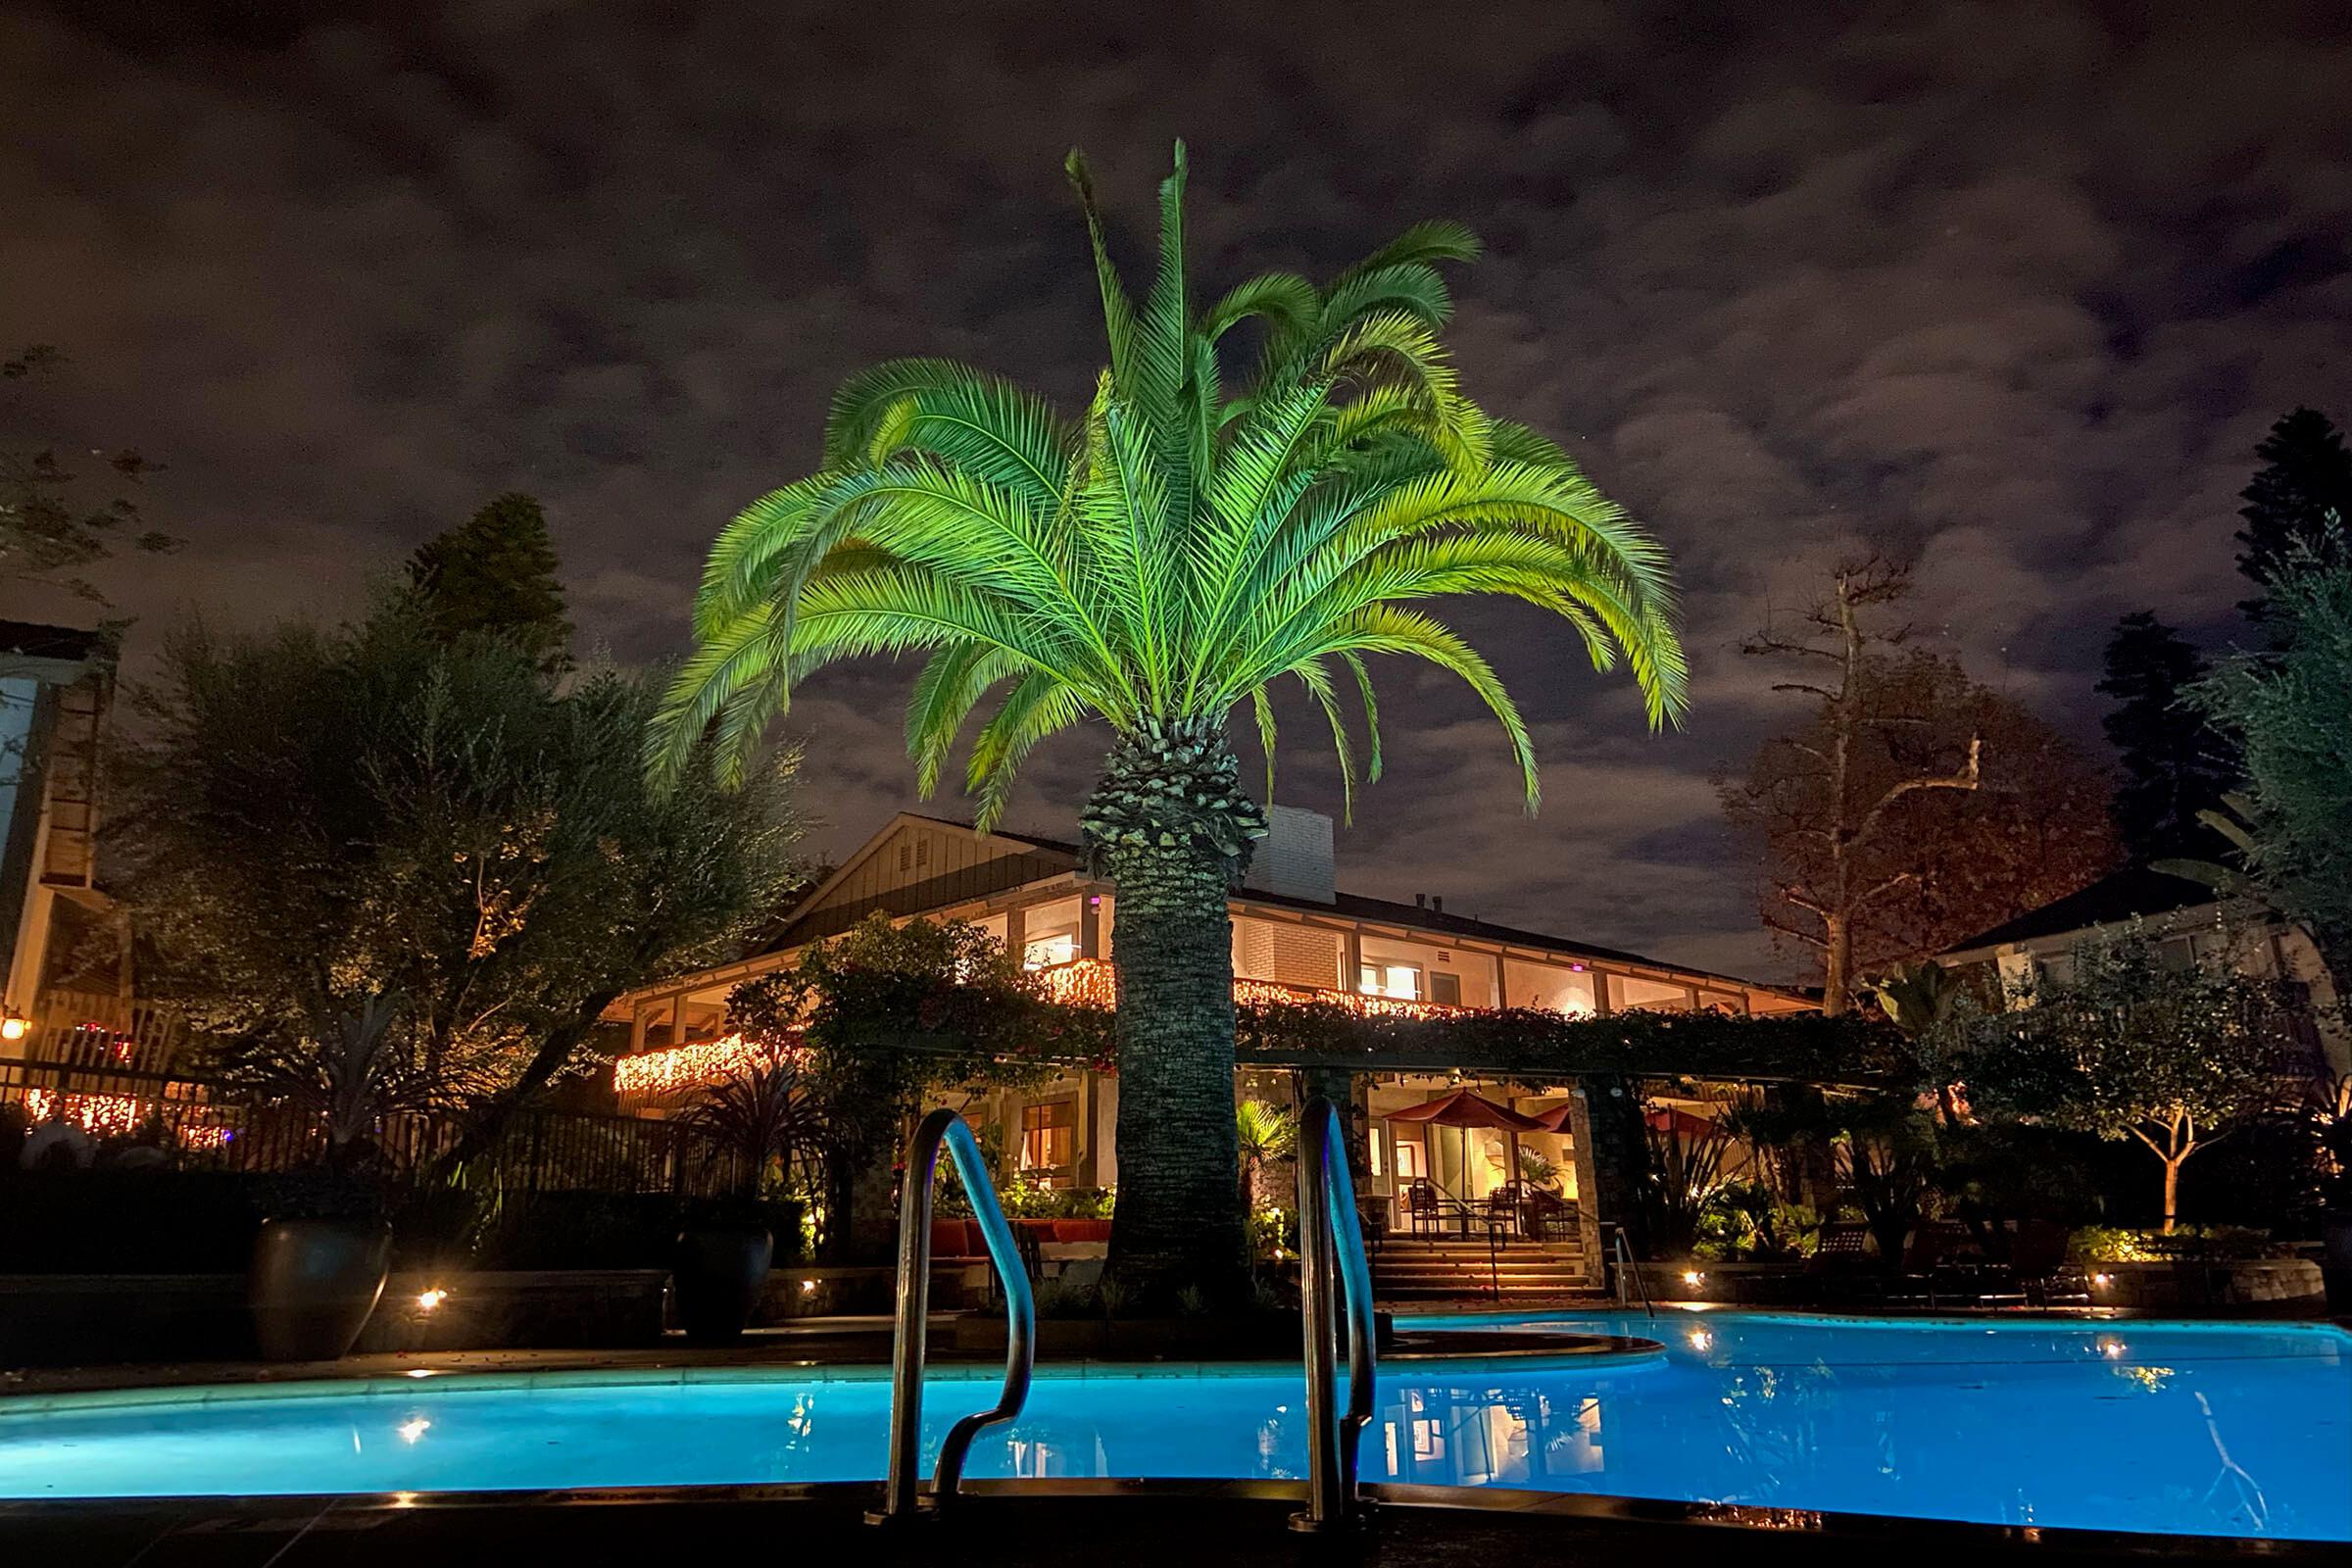 the community pool at night with a green palm tree